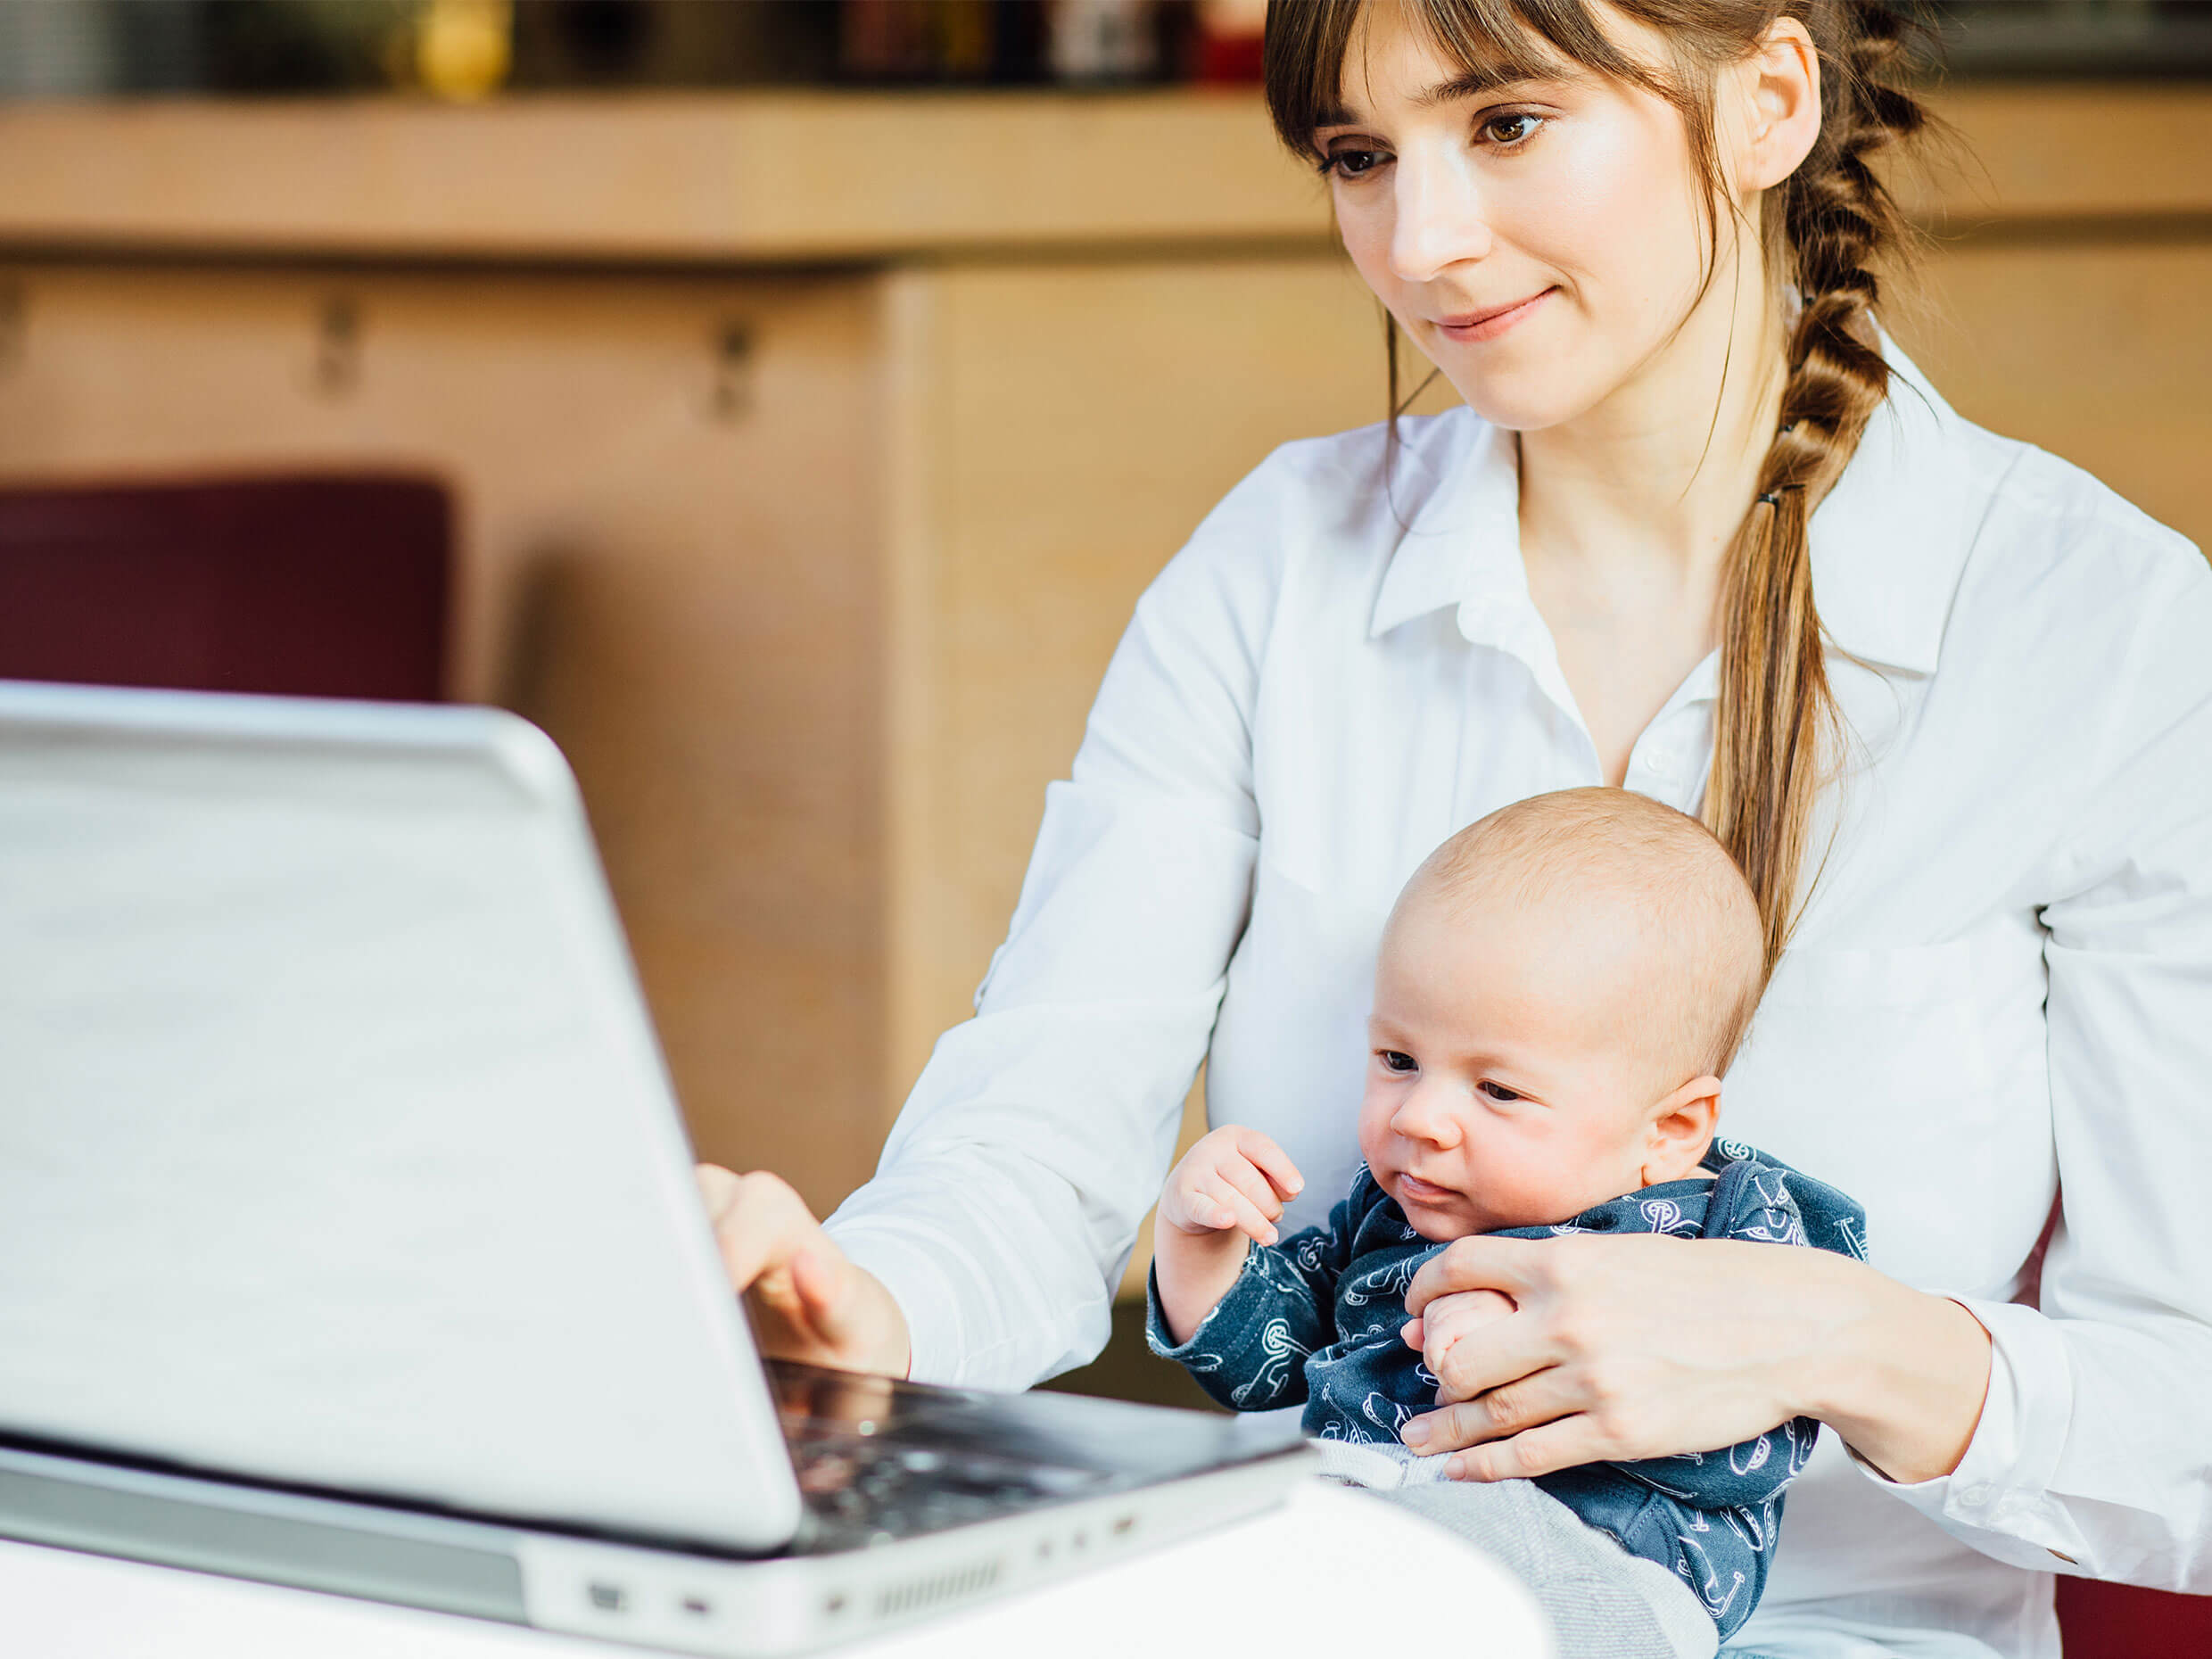 Online student attending online course at home with her son